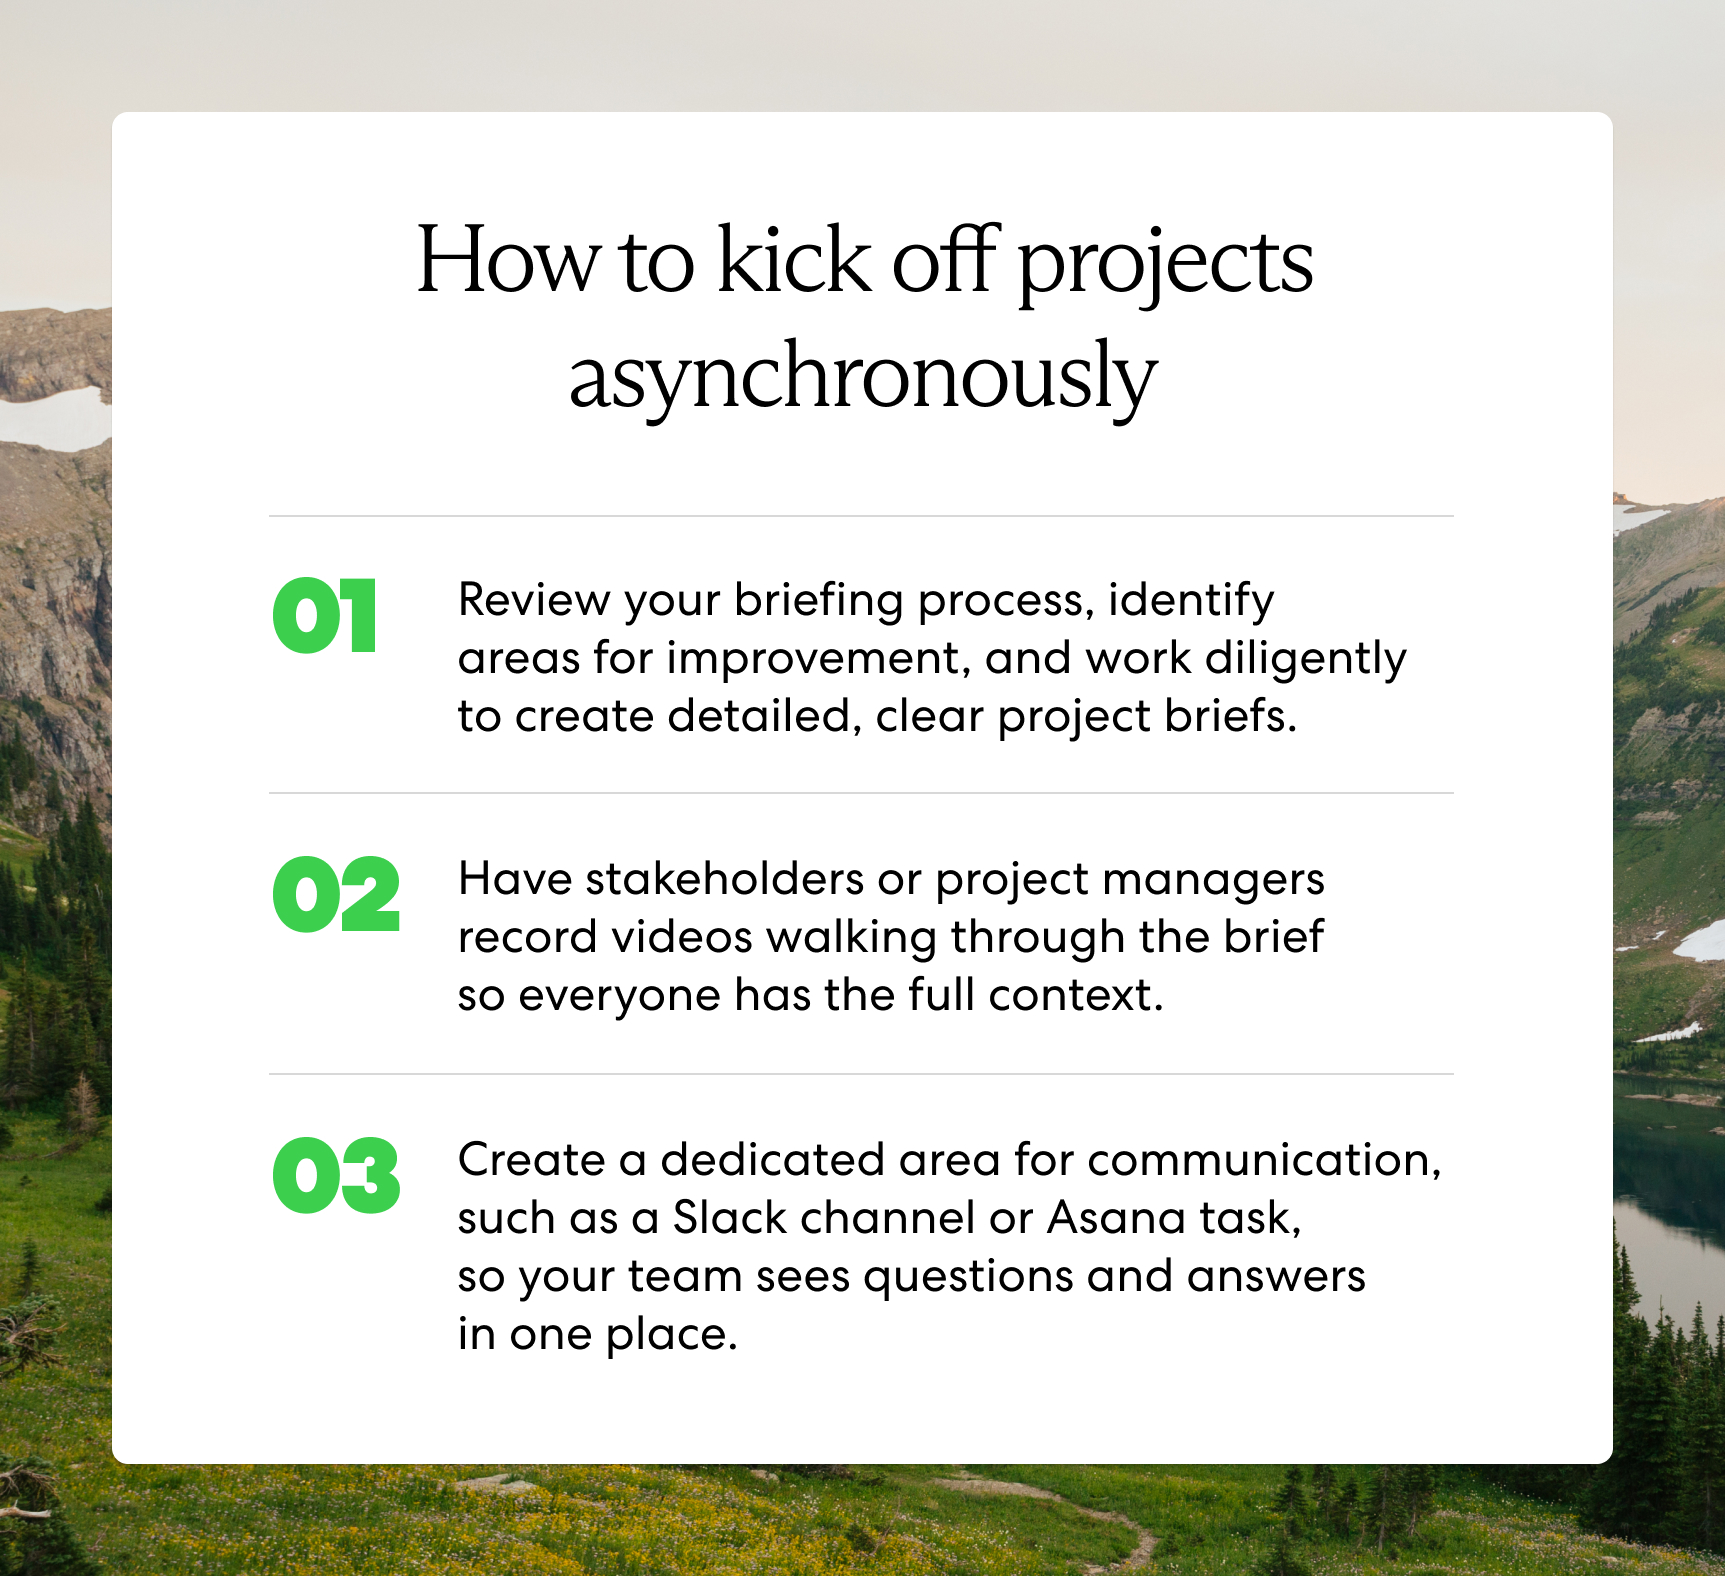 How to kick off projects asynchronously